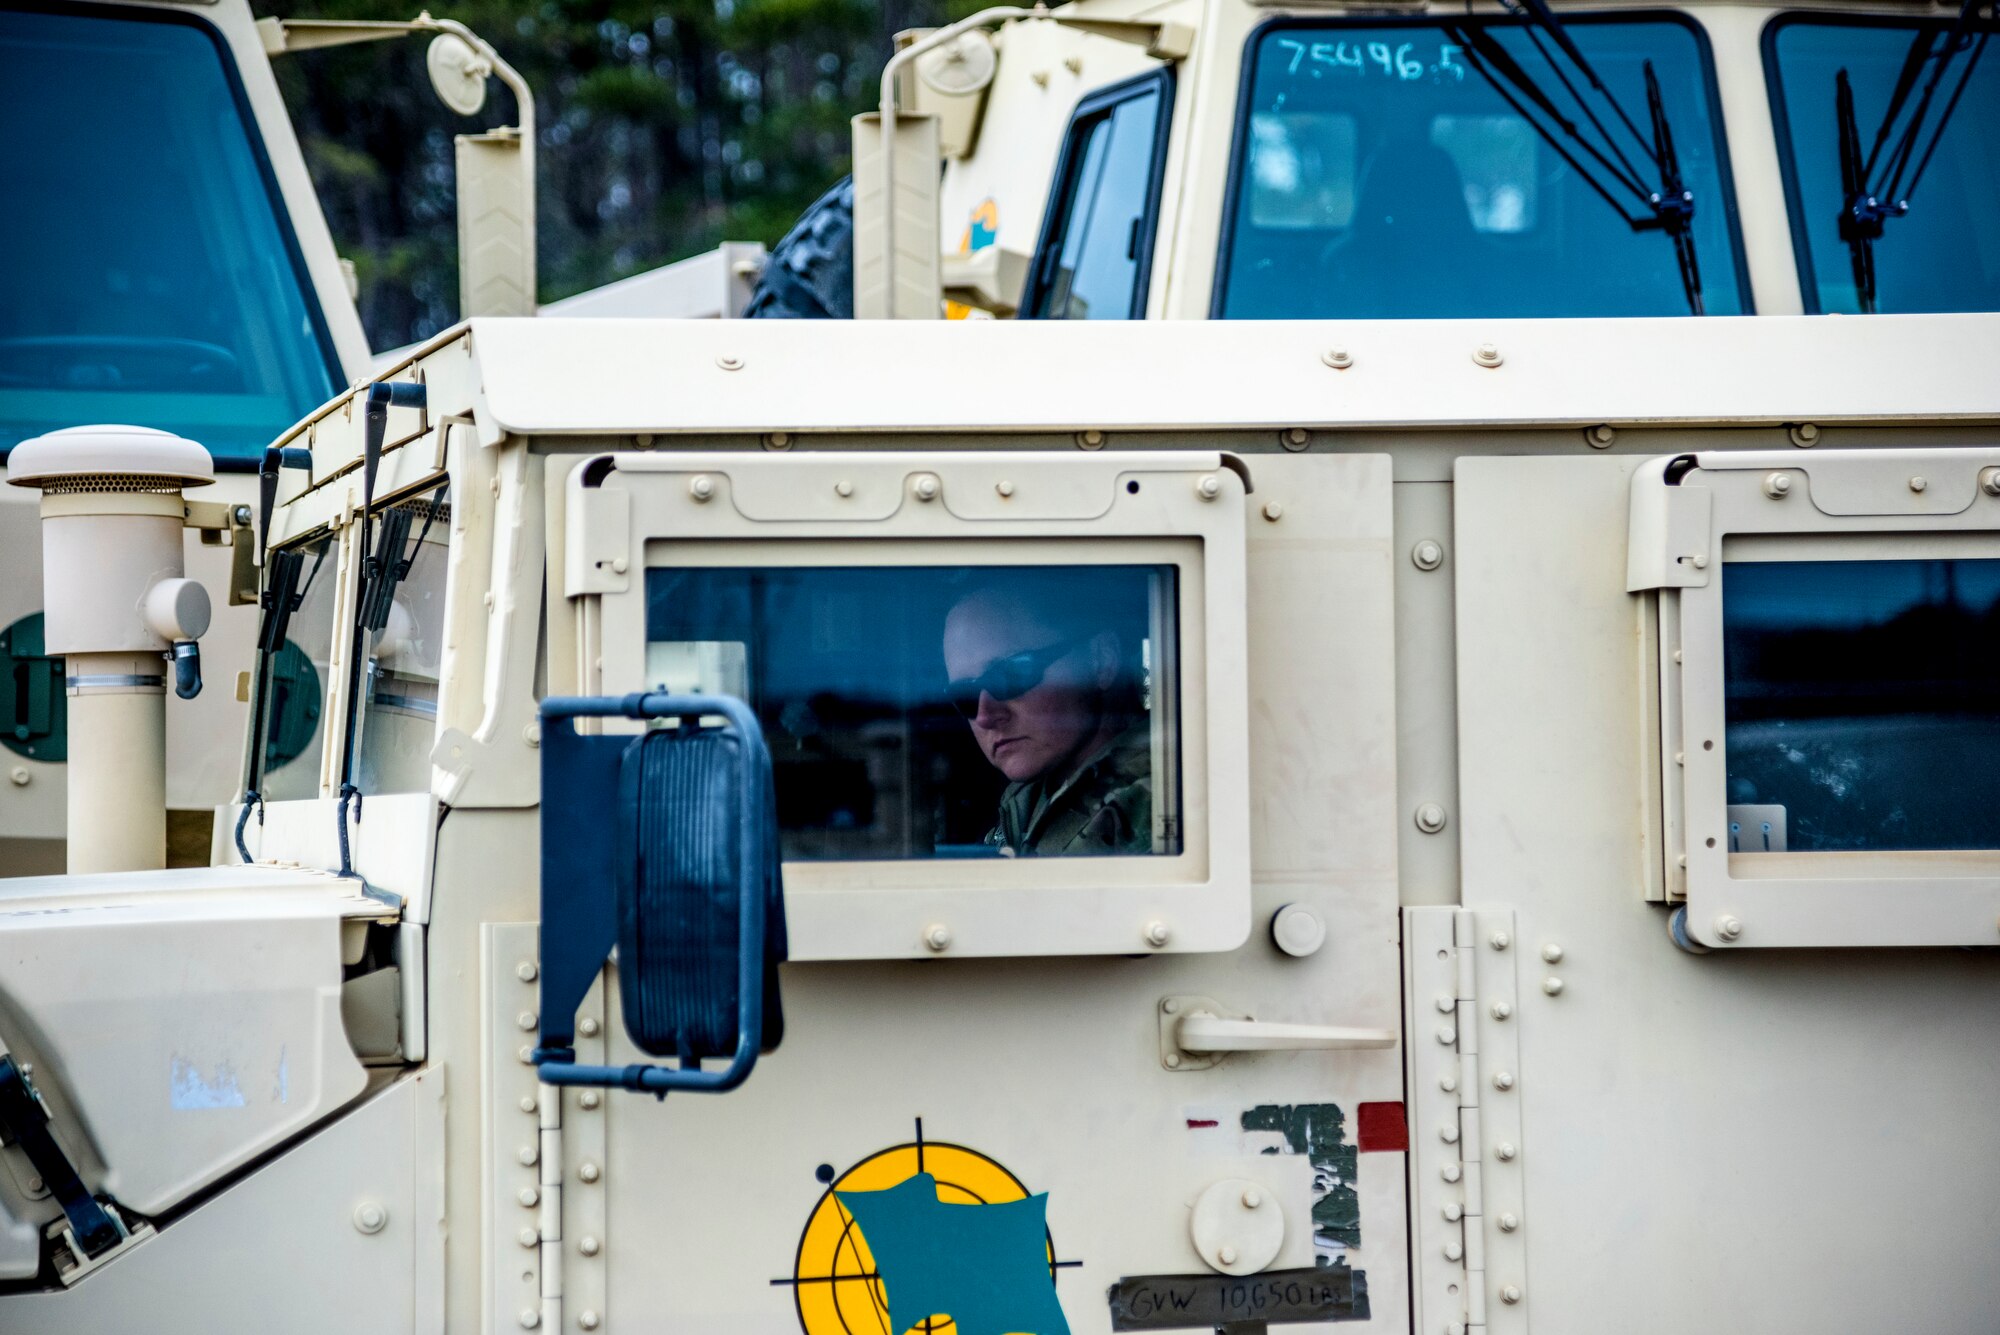 Master Sgt. Stacy Hunt, 34th Combat Training Squadron mission support operations superintendent and 913th Airlift Group traditional reservist, drives a Humvee.